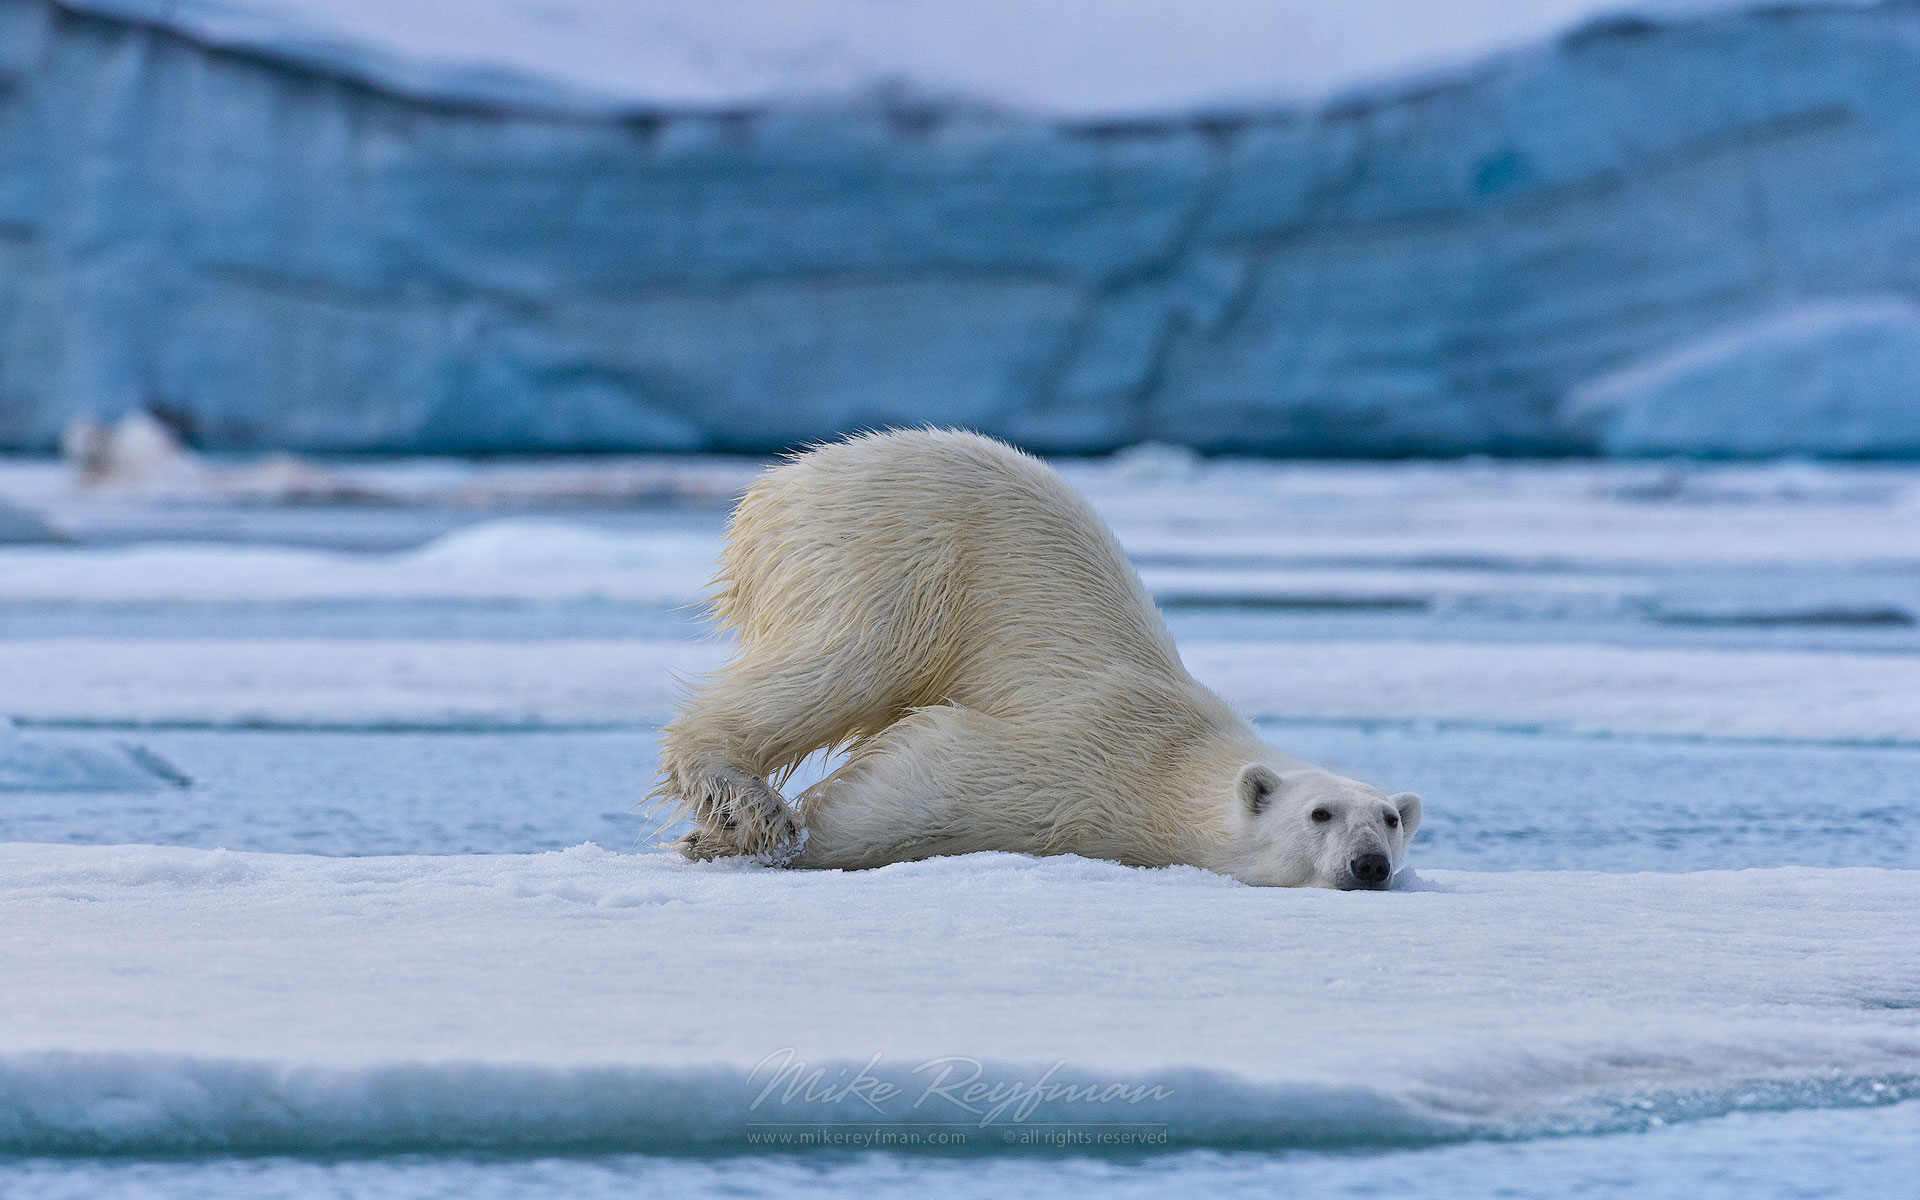 Polar Bear chilling on an ice floe in Svalbard, Norway. 81st parallel North. - Polar-Bears-Svalbard-Spitsbergen-Norway - Mike Reyfman Photography